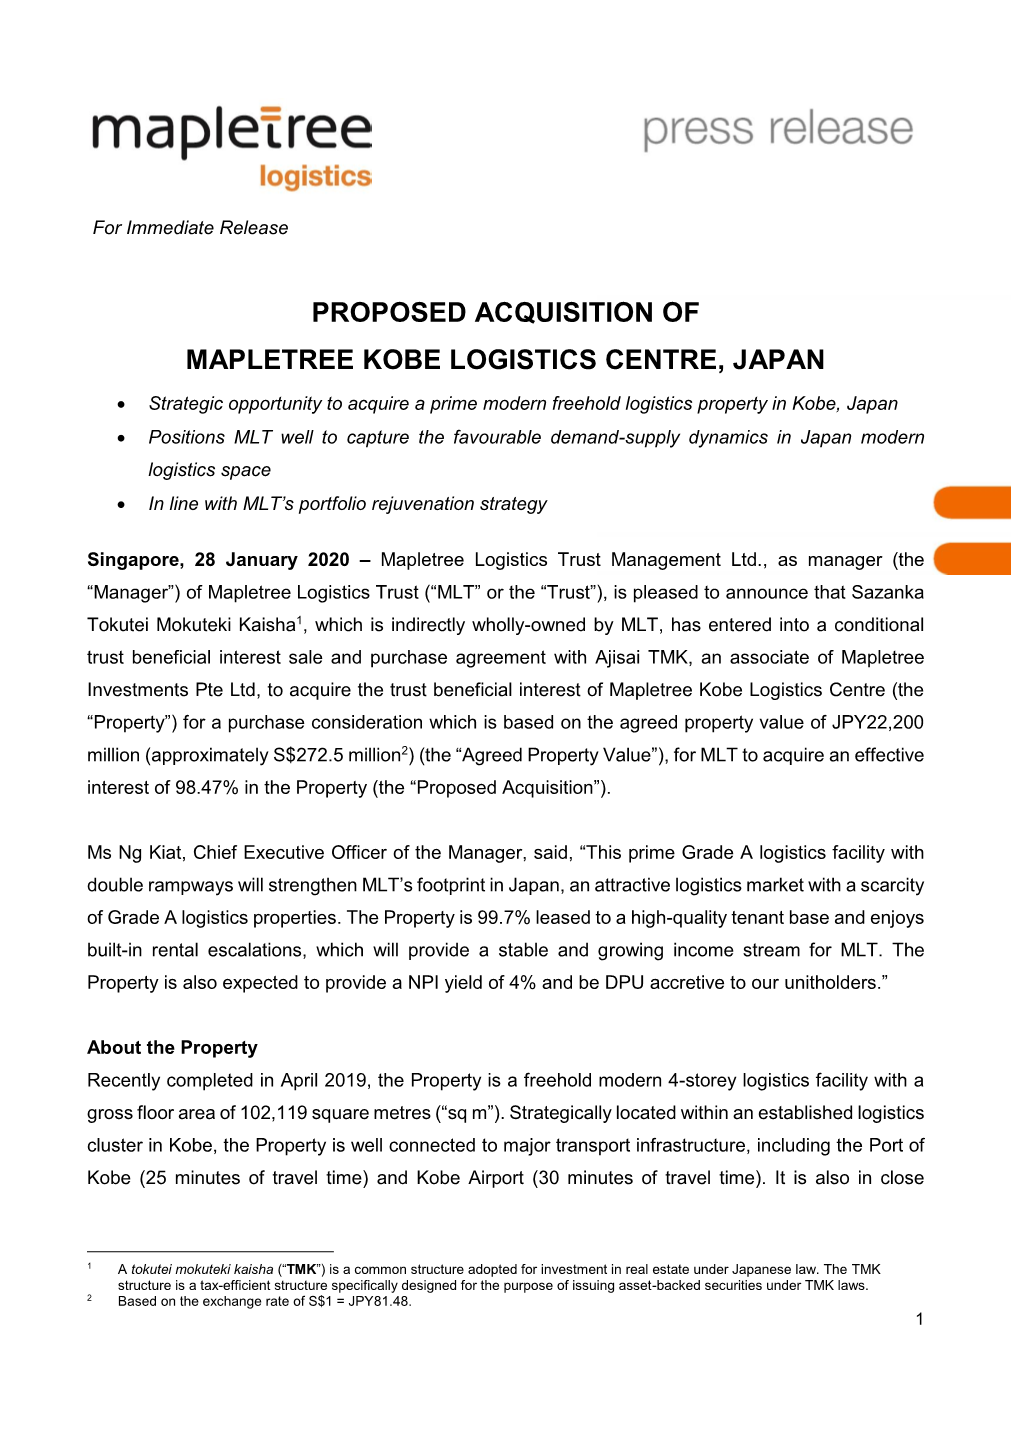 Proposed Acquisition of Mapletree Kobe Logistics Centre, Japan